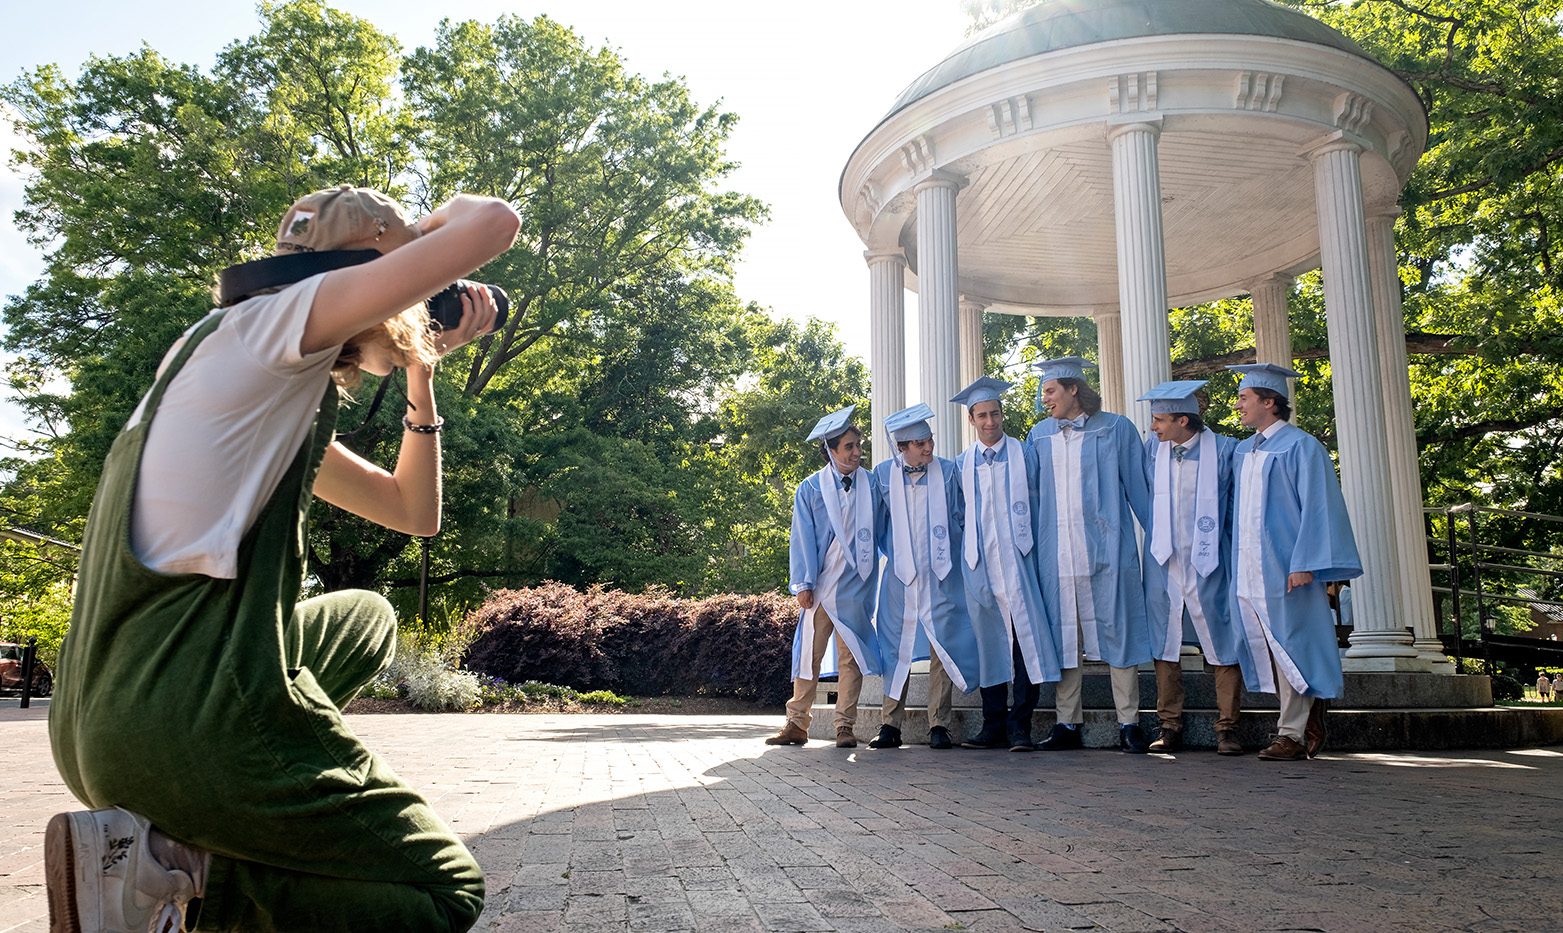 UNC students in graduation regalia pose together by the Old Well.